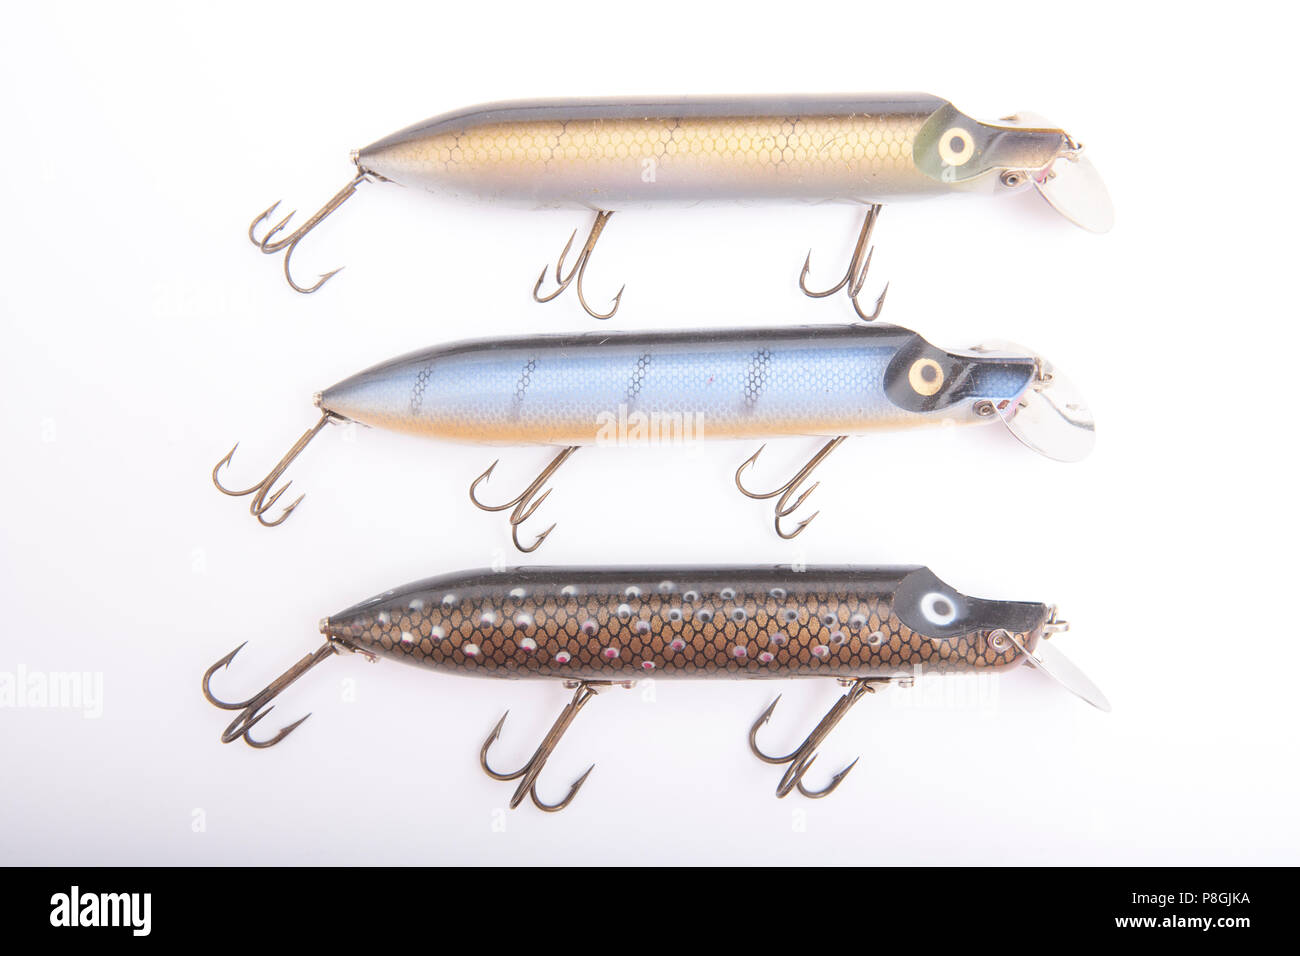 Three Abu Hi-Lo lures, or plugs, from a collection of vintage fishing tackle.  The Hi-Lo lures were so named as they had an adjustable vane on the fron  Stock Photo - Alamy